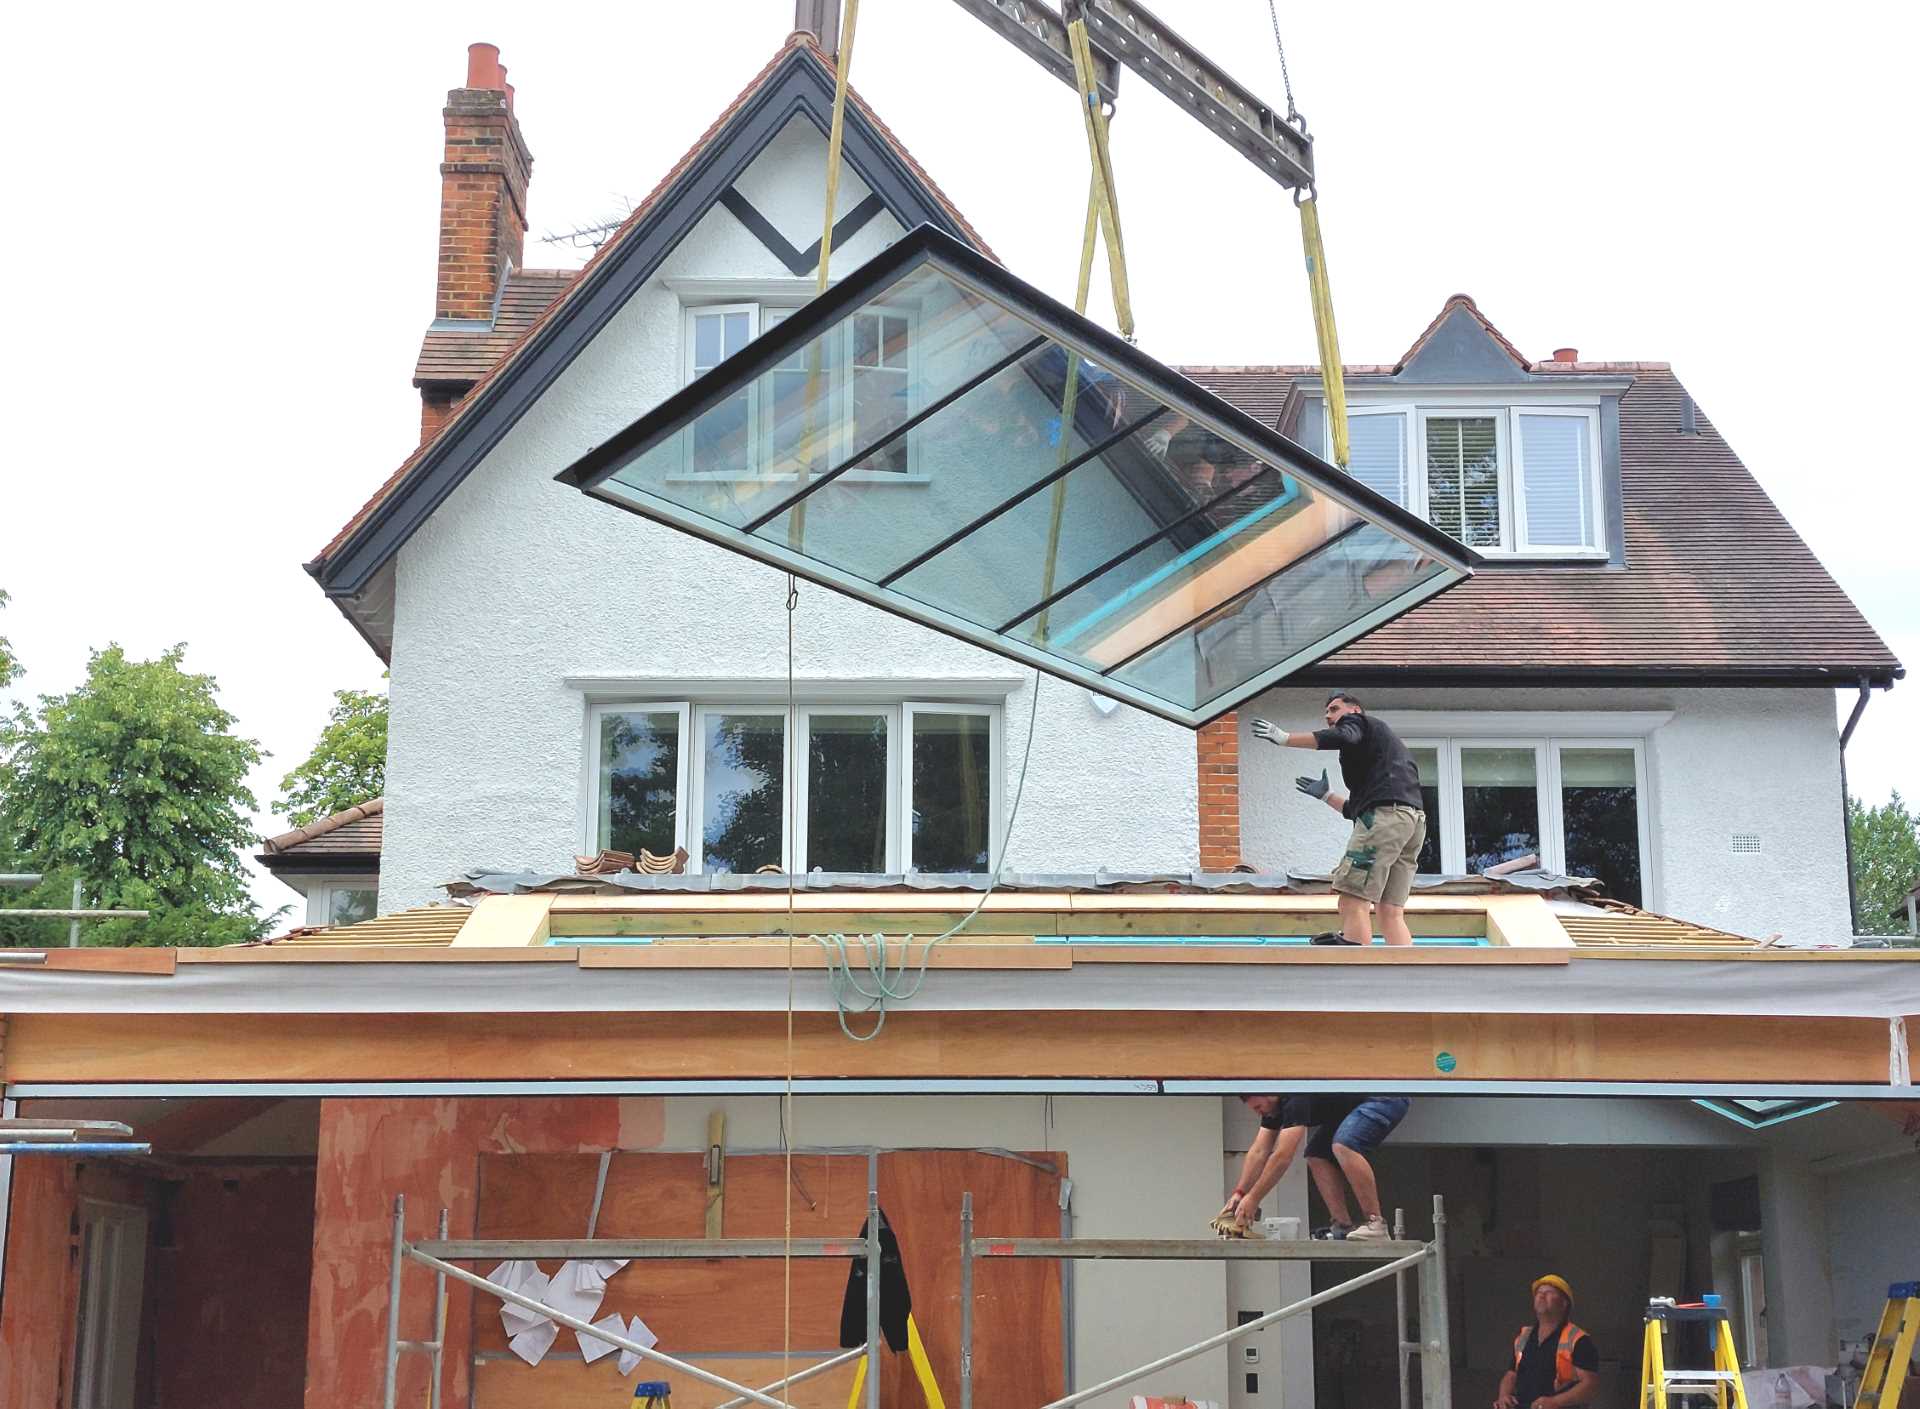 DURING - An updated brick extension for an Edwardian home.